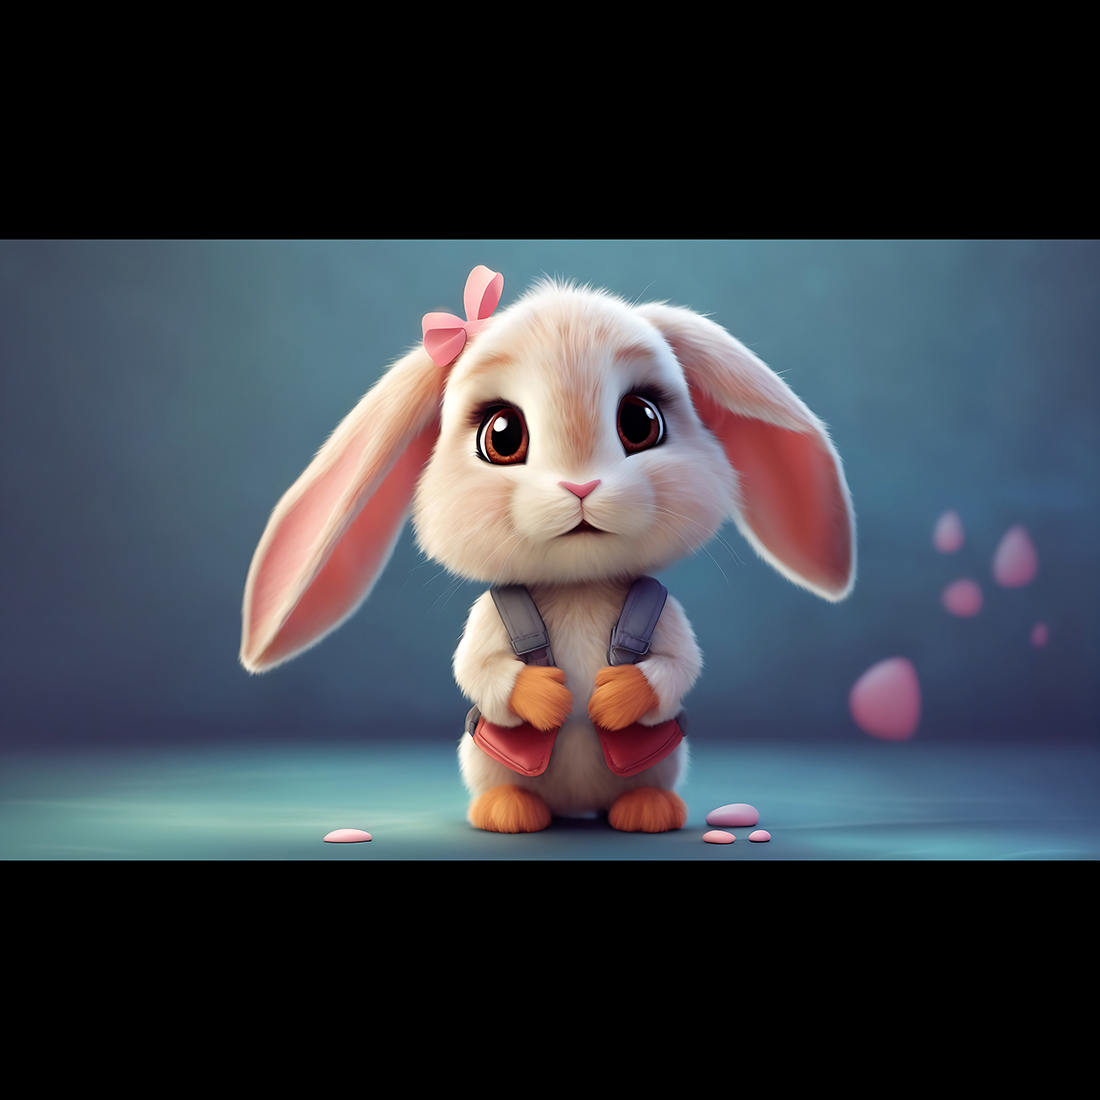 Cute Pixar style pink baby rabbit standing on a abstruct background - ai generated preview image.